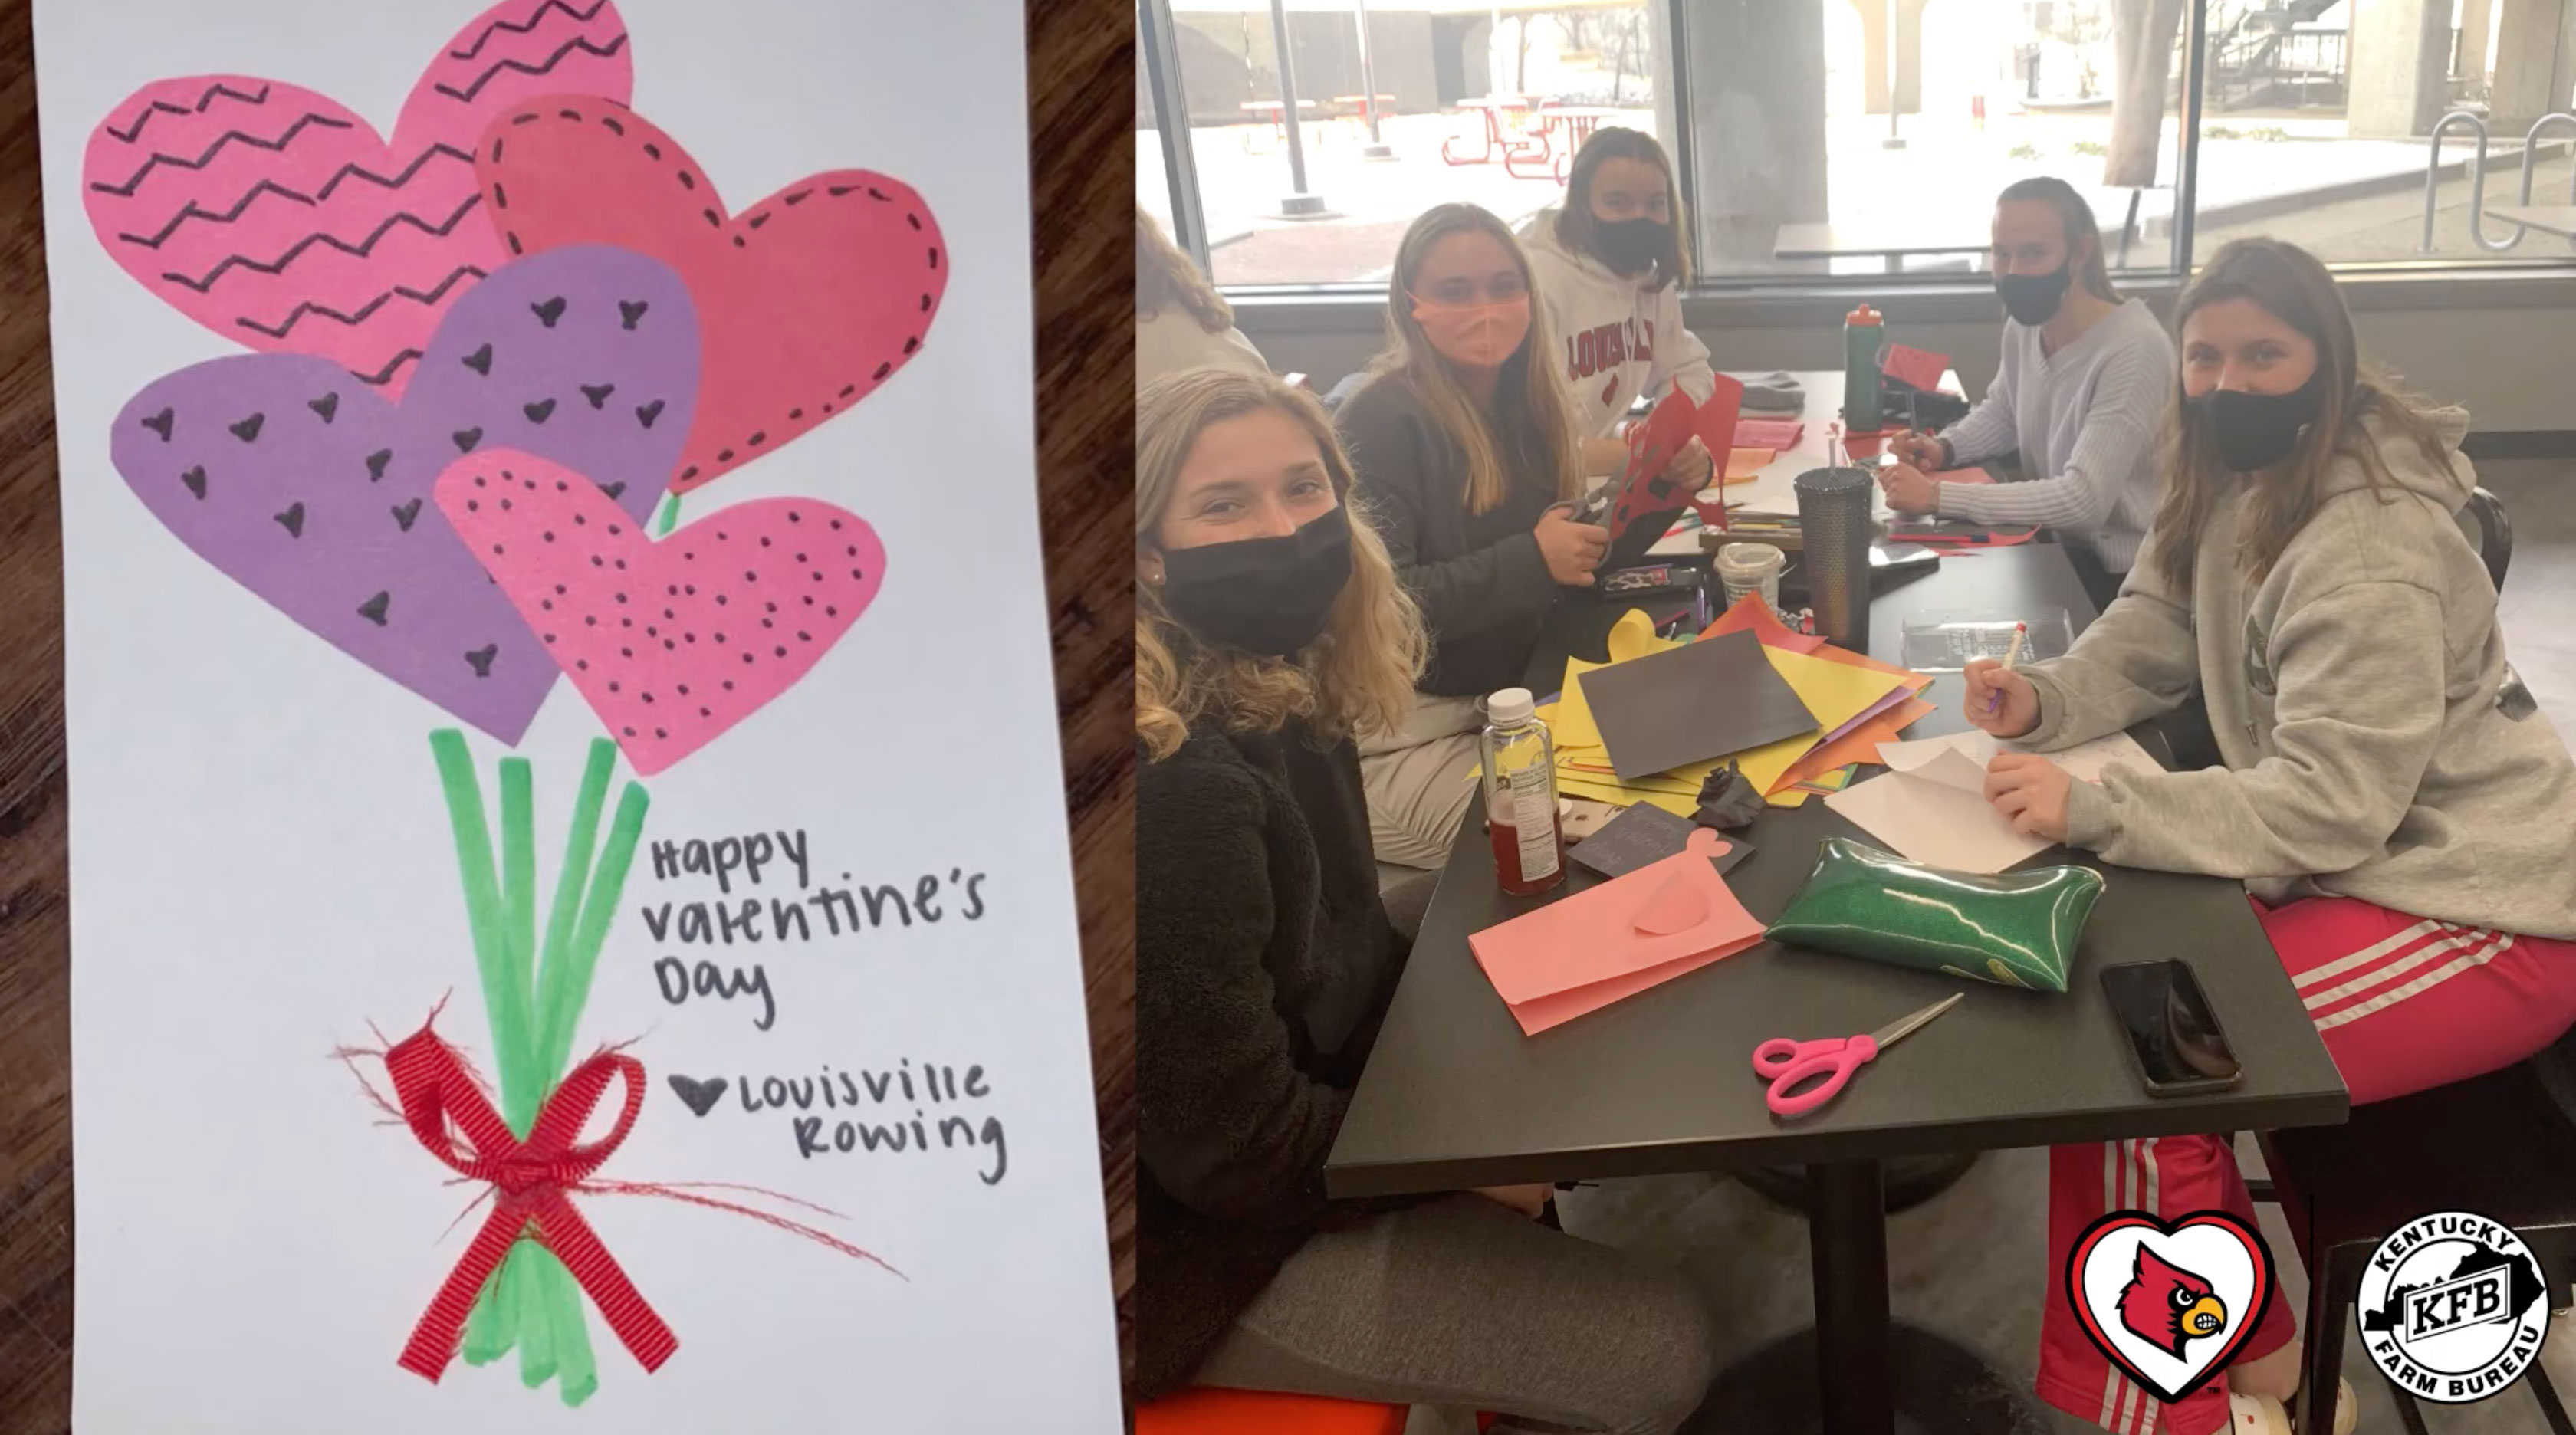 More than 220 UofL student-athletes from 10 different teams participated in a form of service for Valentine's Day